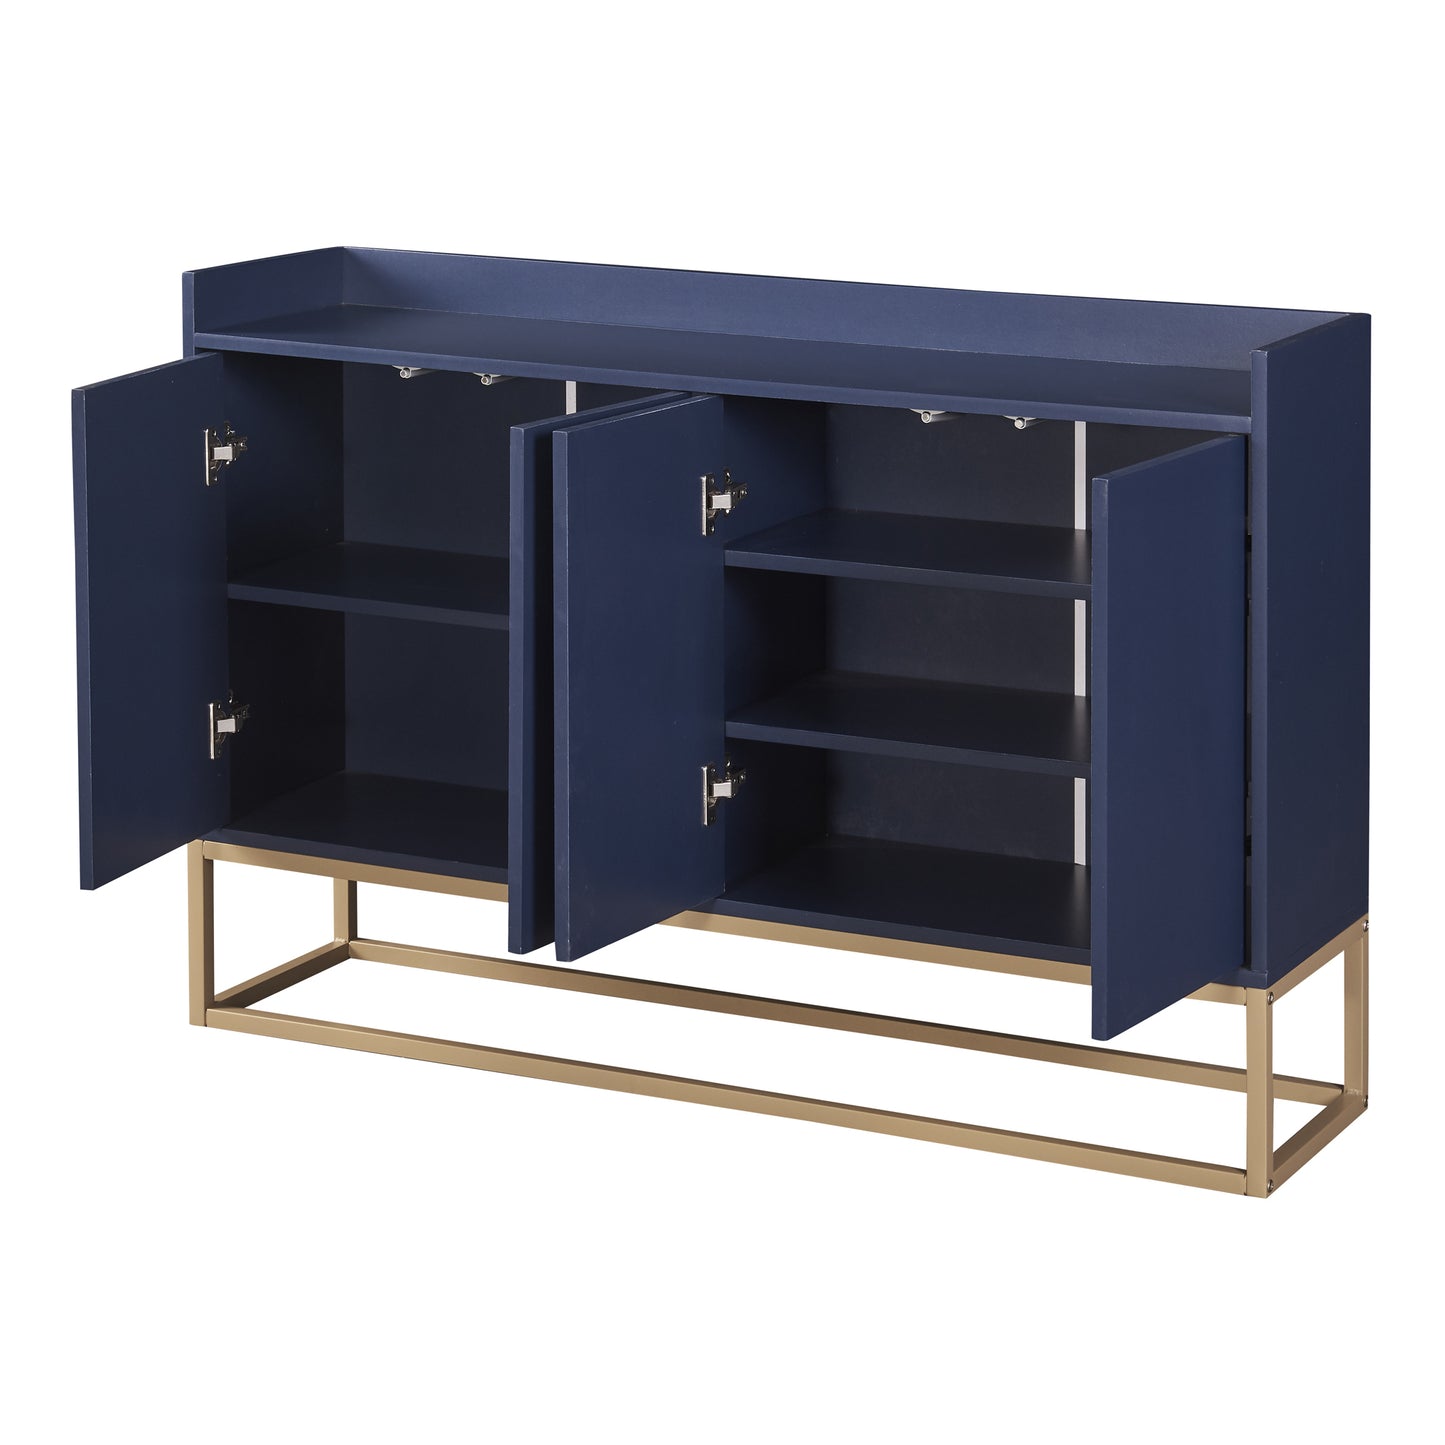 TREXM Elegant Buffet Cabinet with Large Storage Space for Dining Room, Entryway Navy